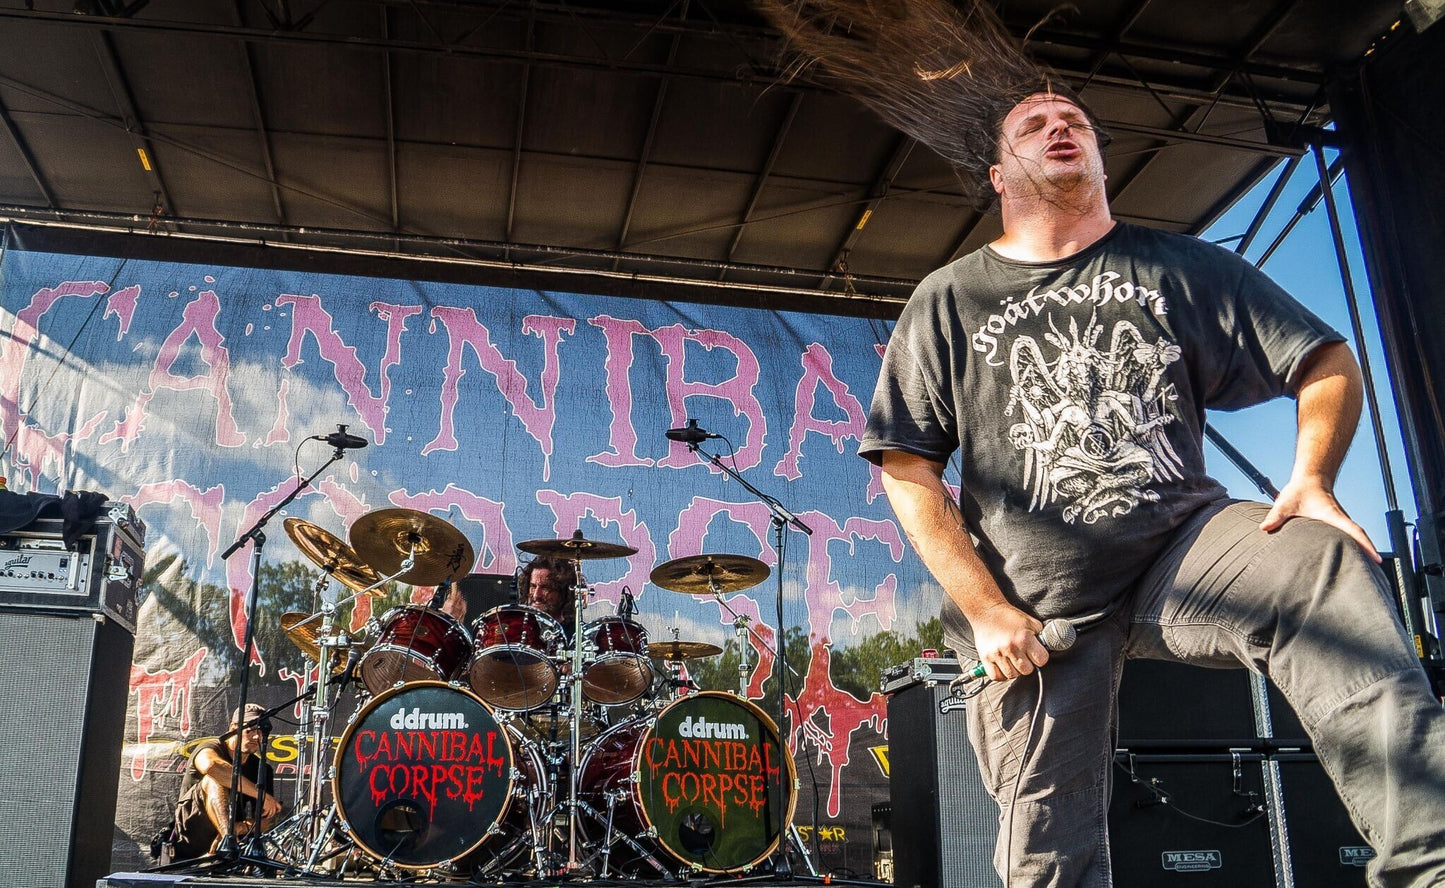 Cannibal Corpse - George Fisher and Paul Mazurkiewicz on Stage with the Band's Banner Backdrop, USA, 2014 Poster